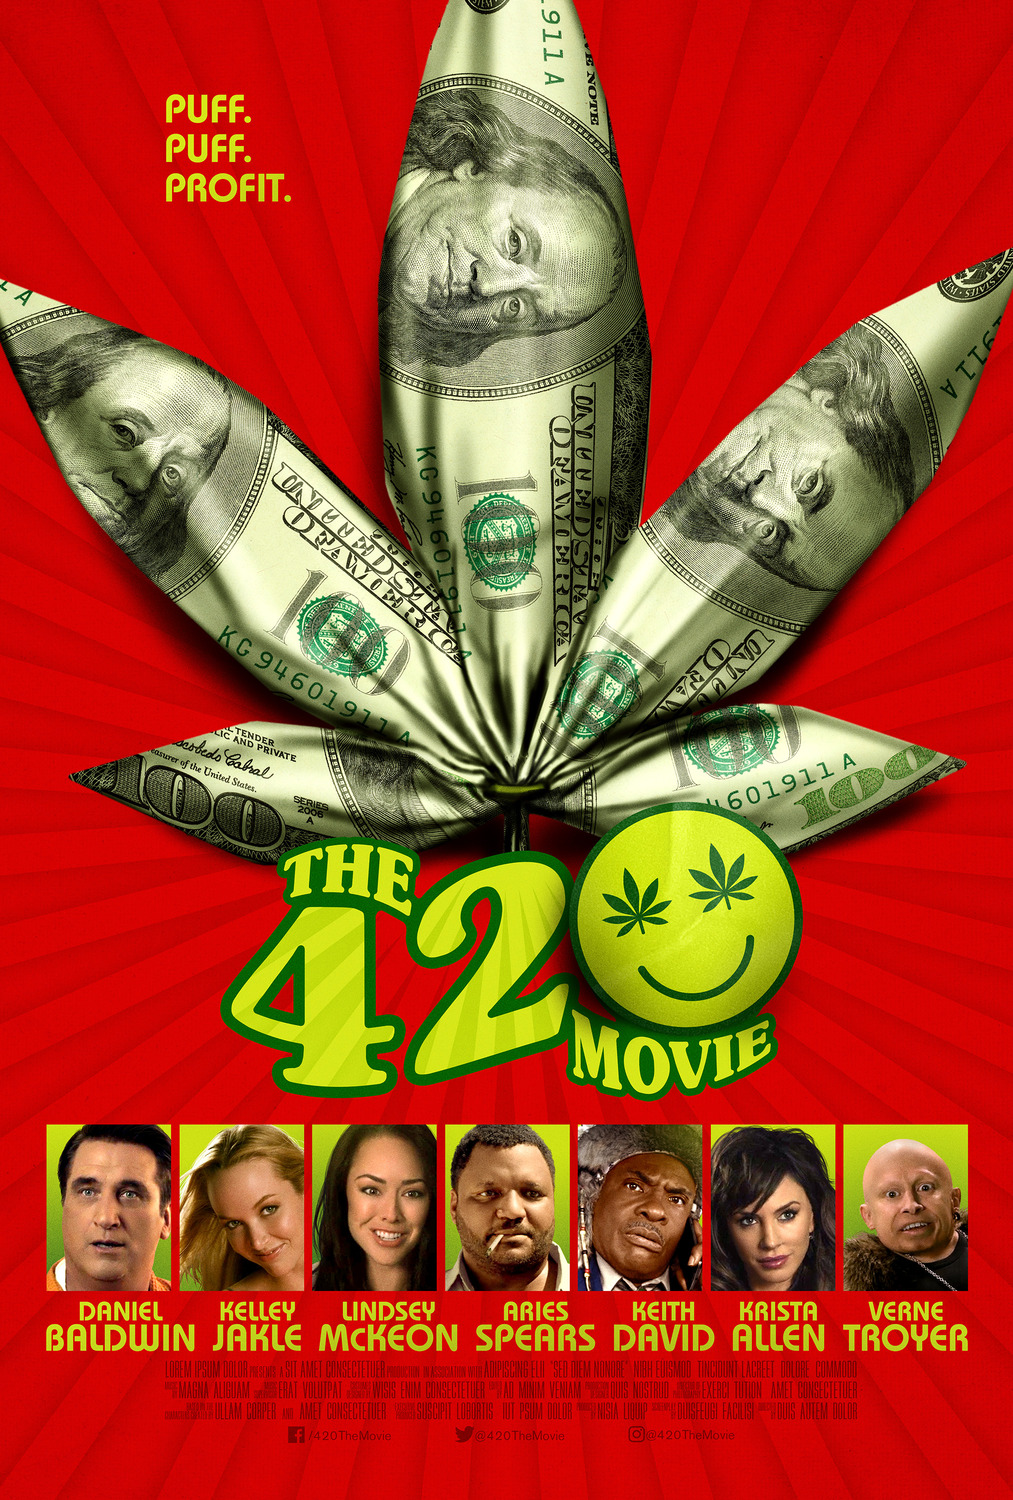 Extra Large Movie Poster Image for The 420 Movie 